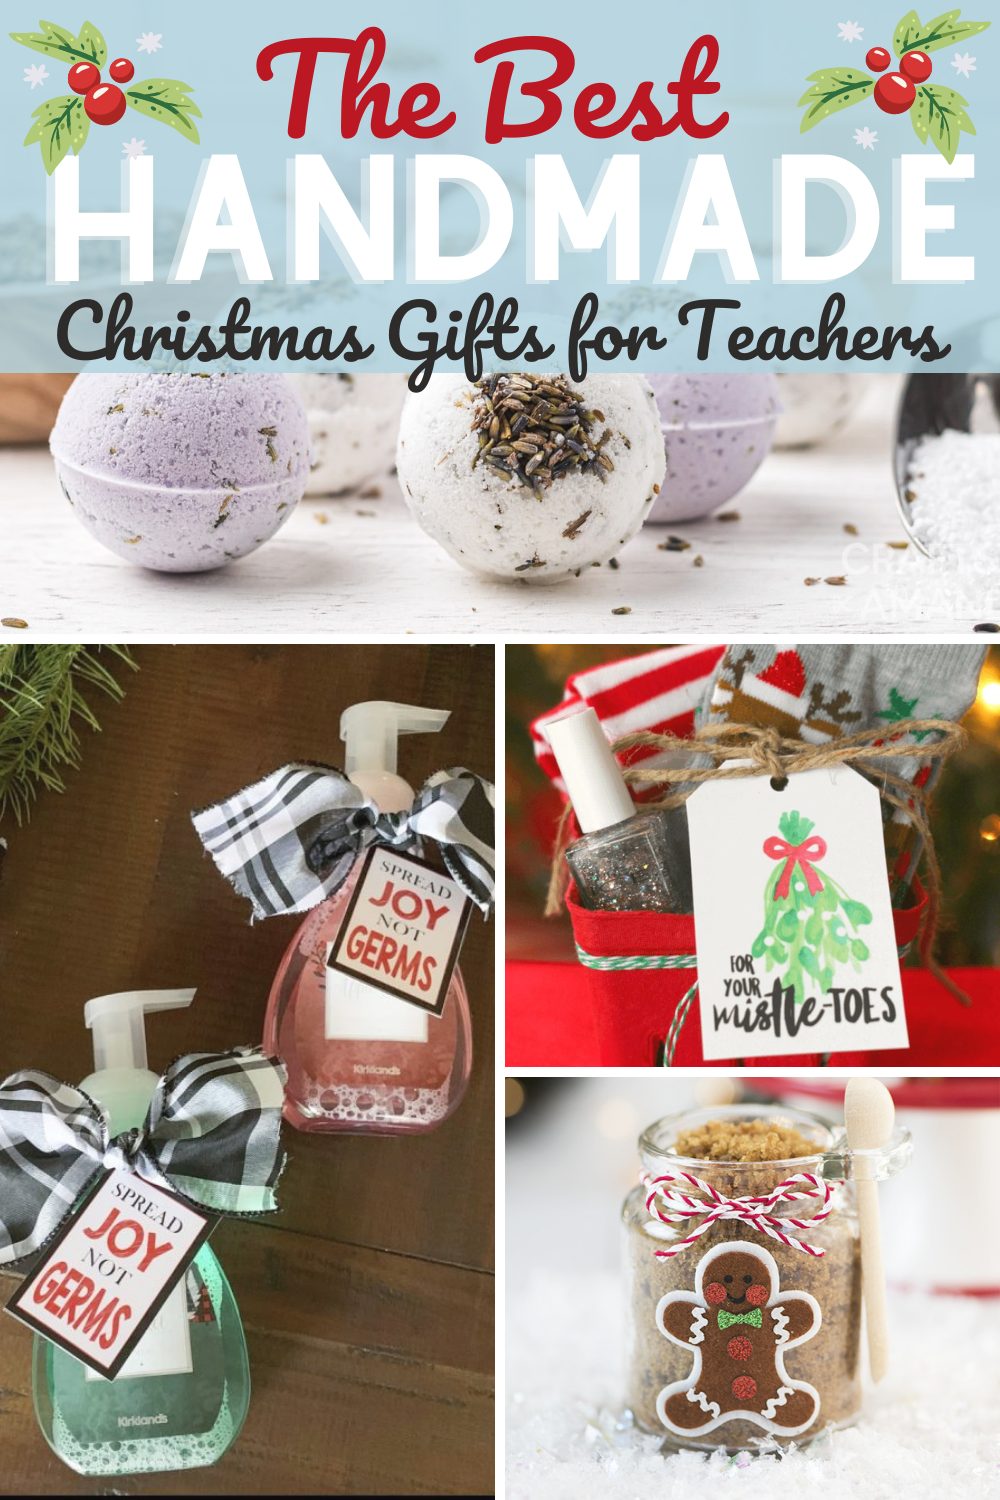 Best teacher gifts for Christmas | The Independent